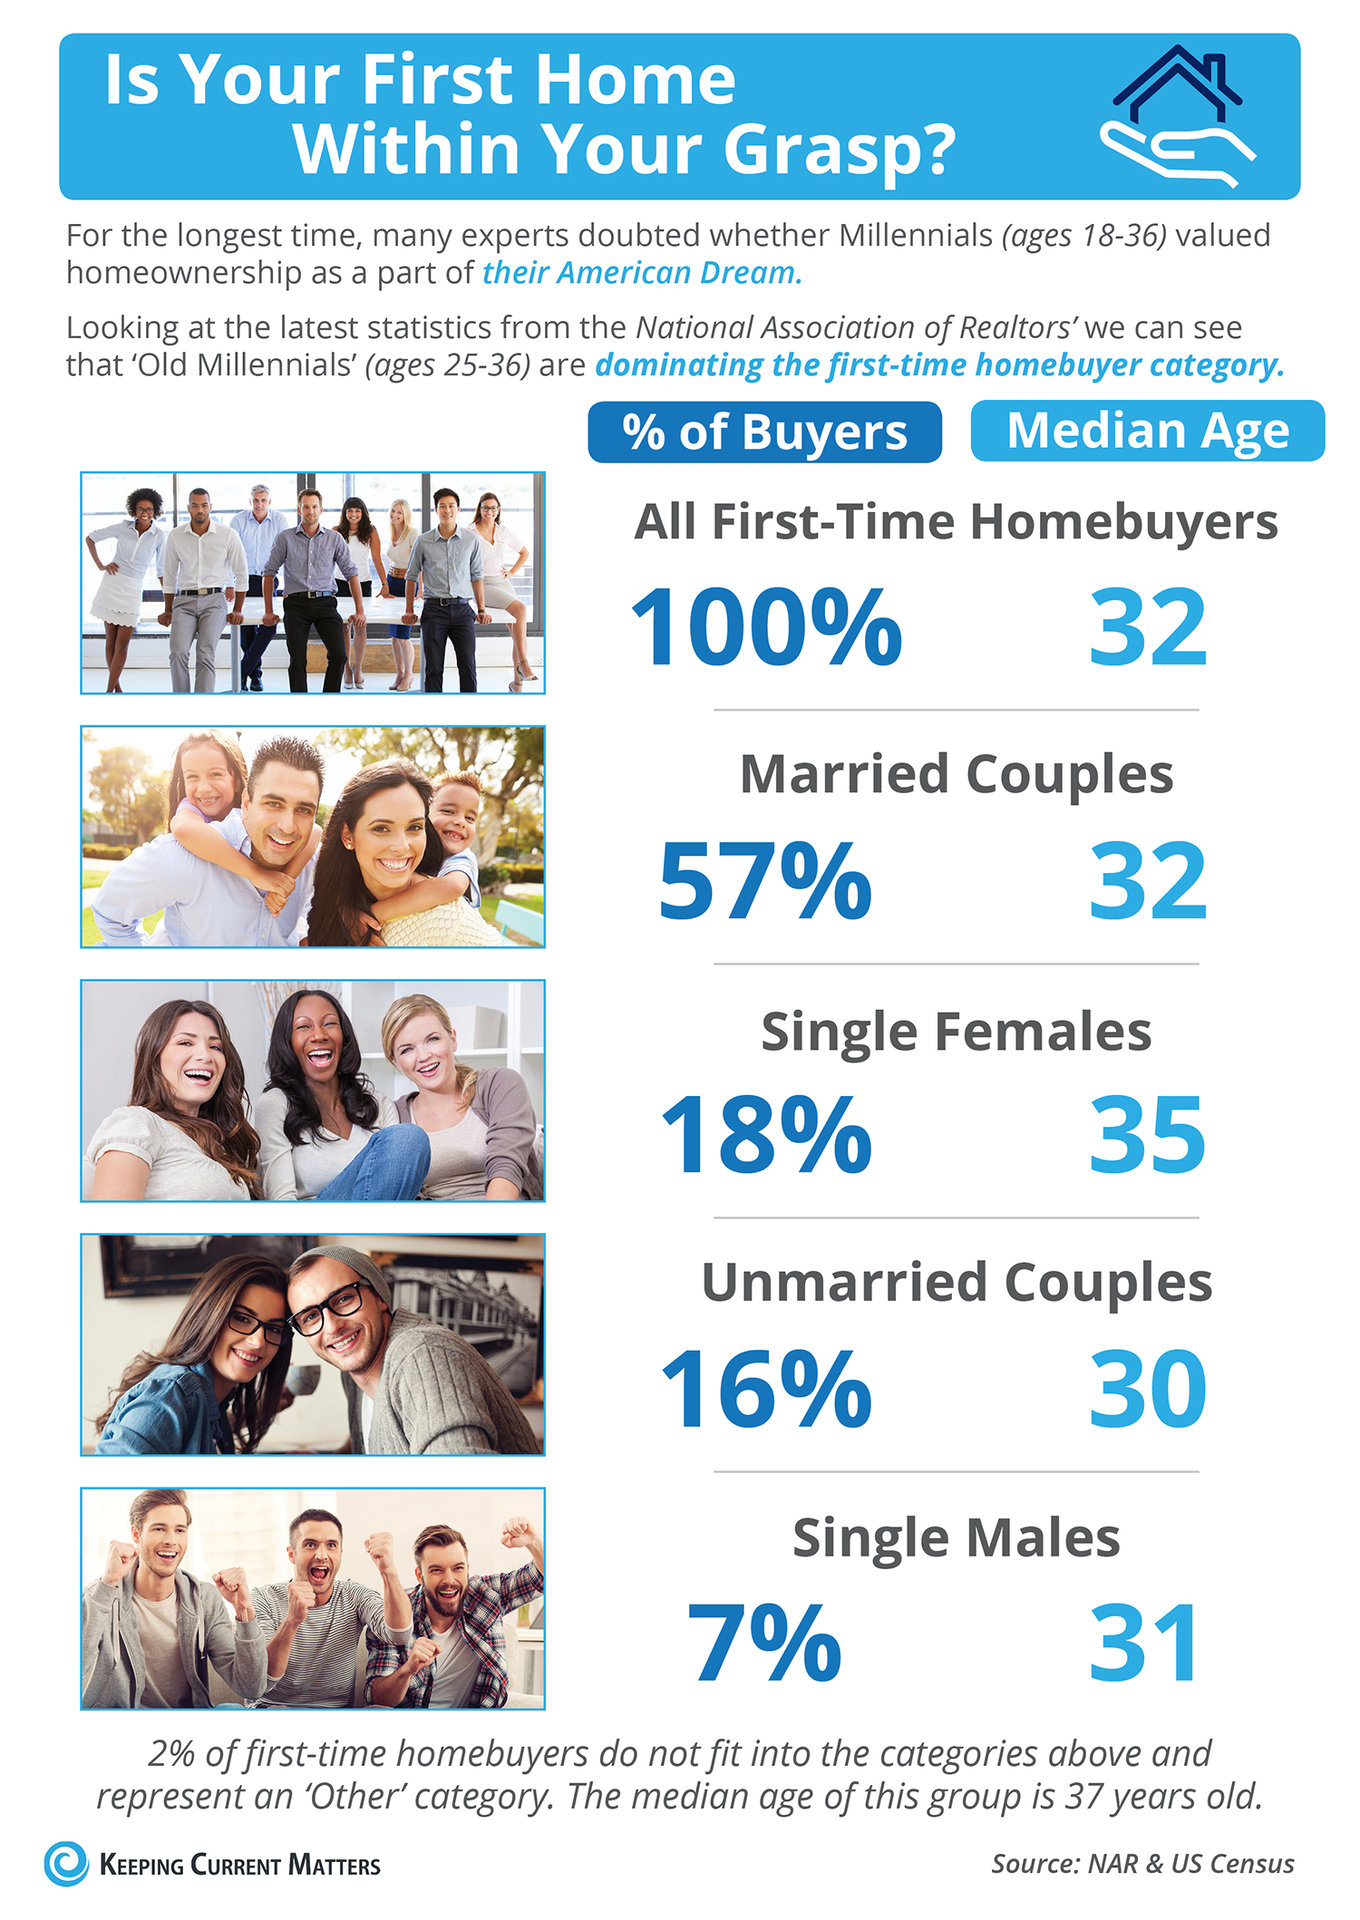 Is Your First Home Within Your Grasp Now? [INFOGRAPHIC] | Keeping Current Matters